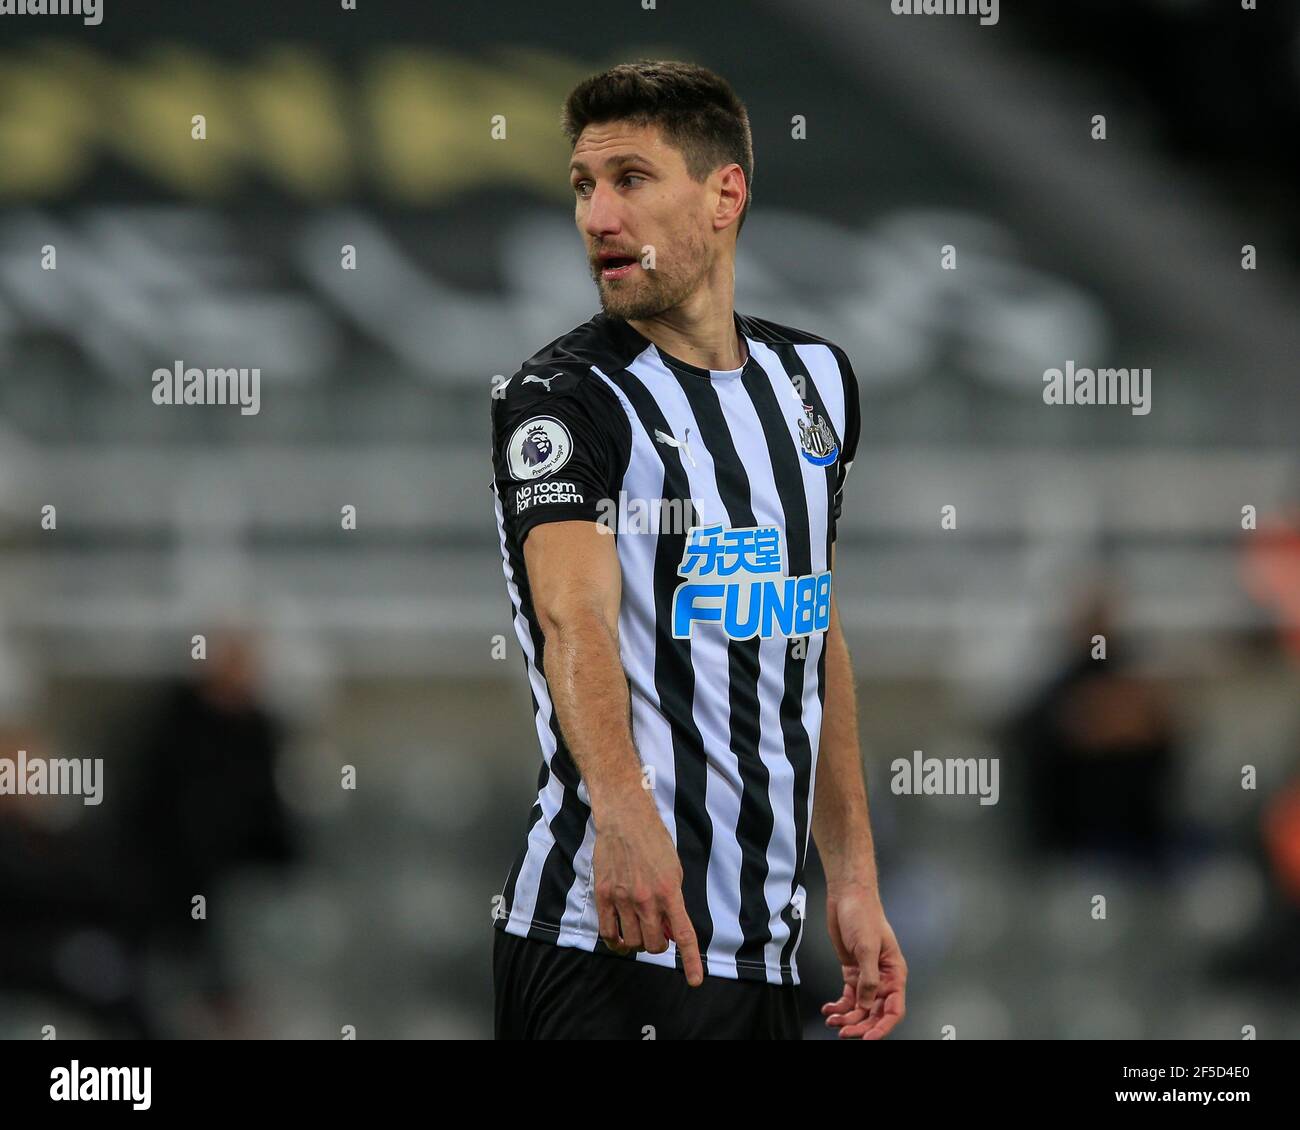 Federico Fernández #18 of Newcastle United during the game Stock Photo